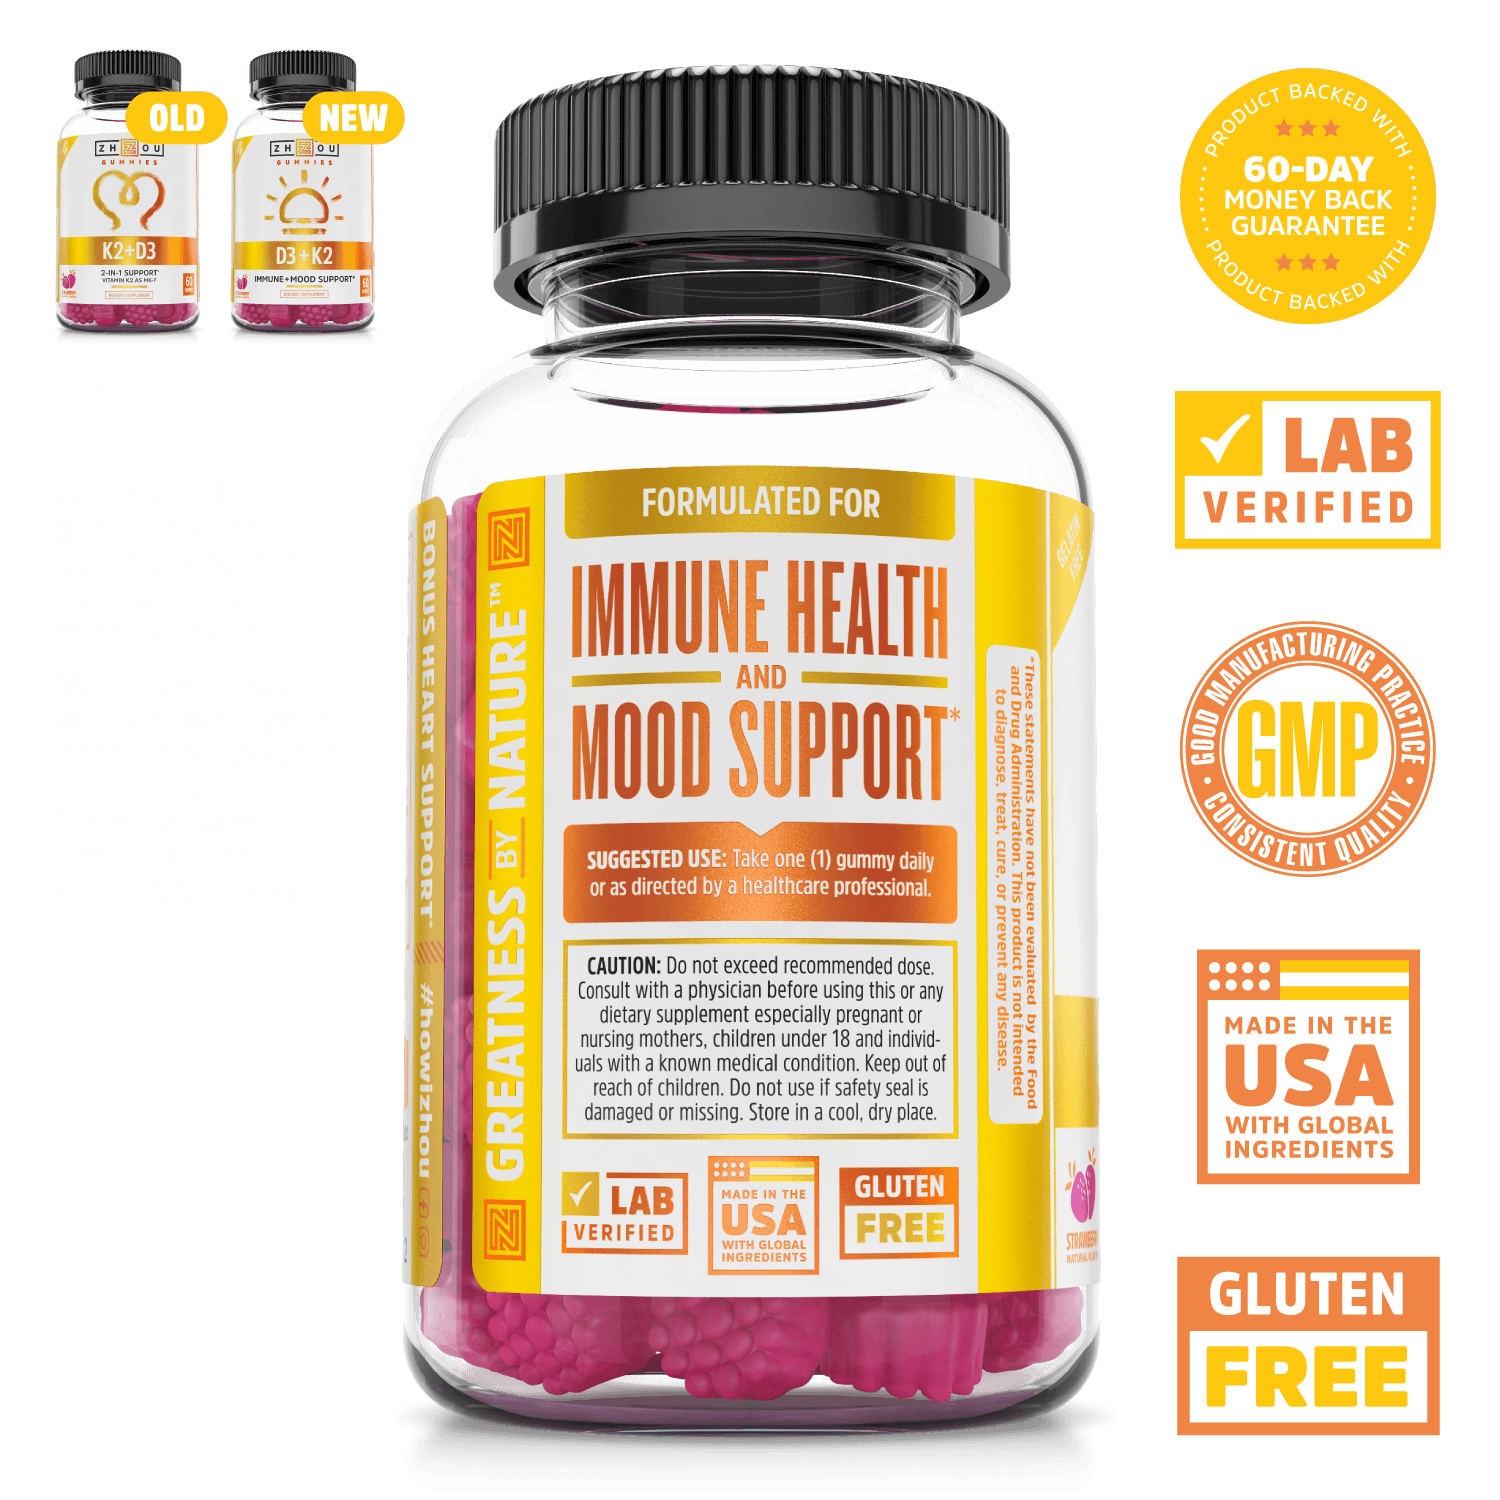 Vitamin D supplement gummies formulated for immune health and mood support. 60-day money back guarantee, lab verified, vegetarian, good manufacturing practices, made in the USA with global ingredients, gluten free